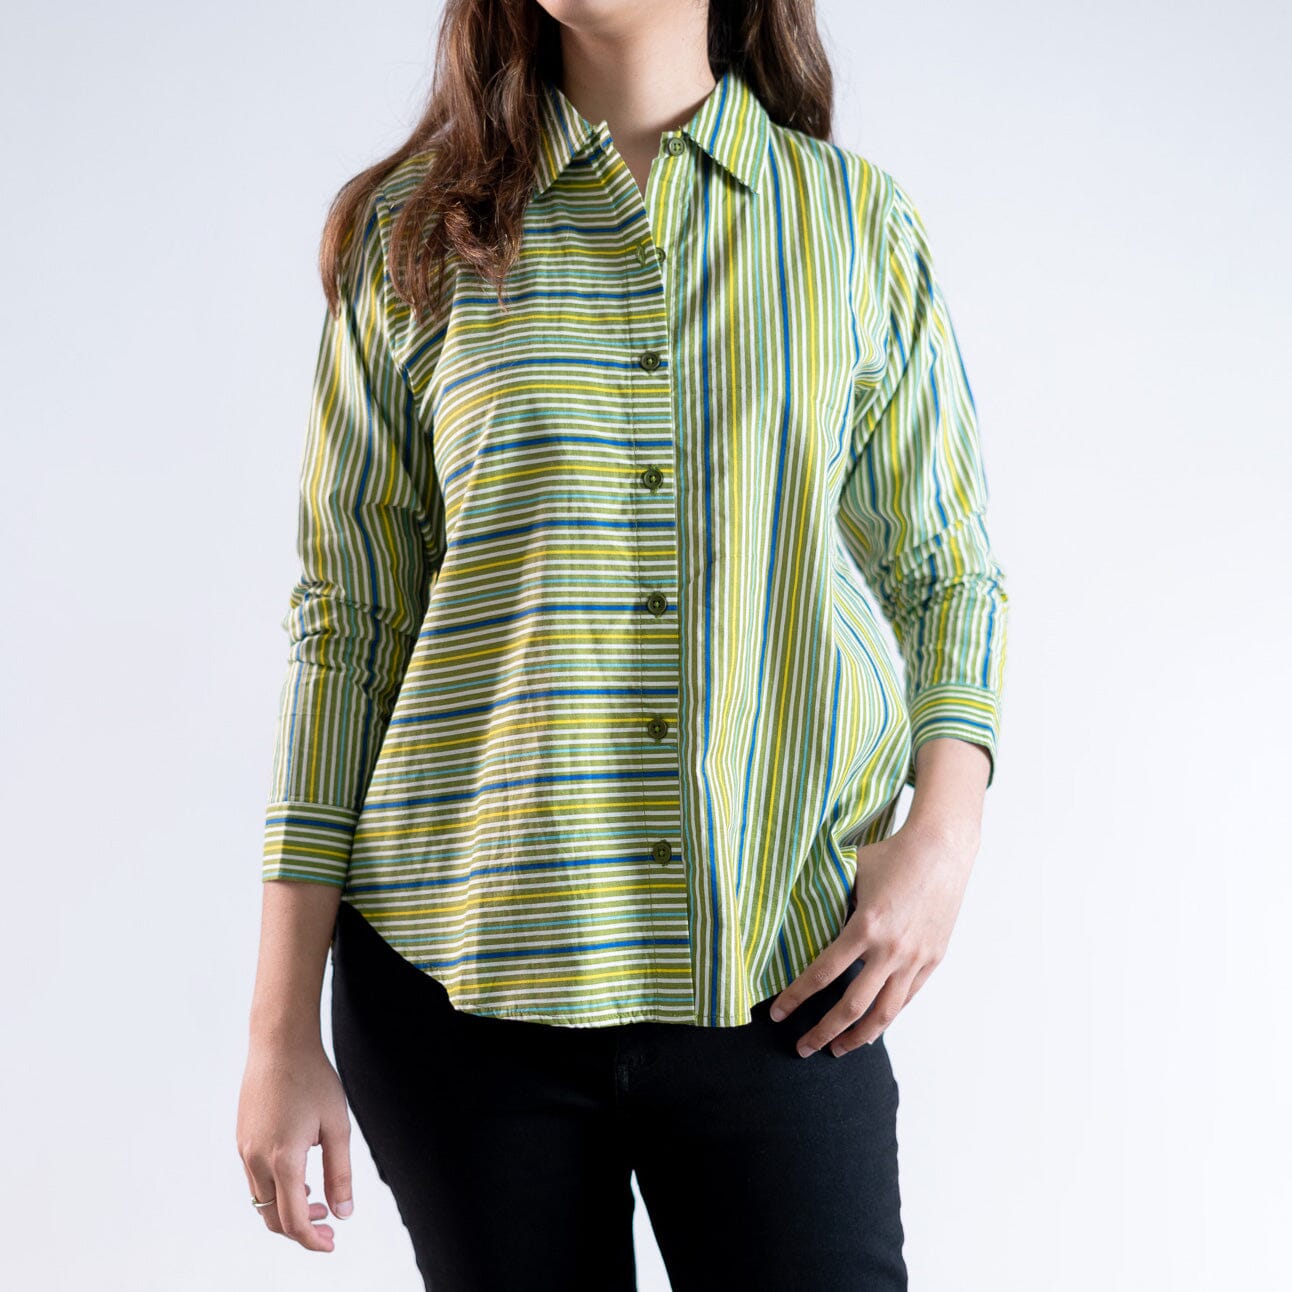 East West Women's Narrow Lining Style Casual Shirt Women's Casual Shirt East West Green & White XS 